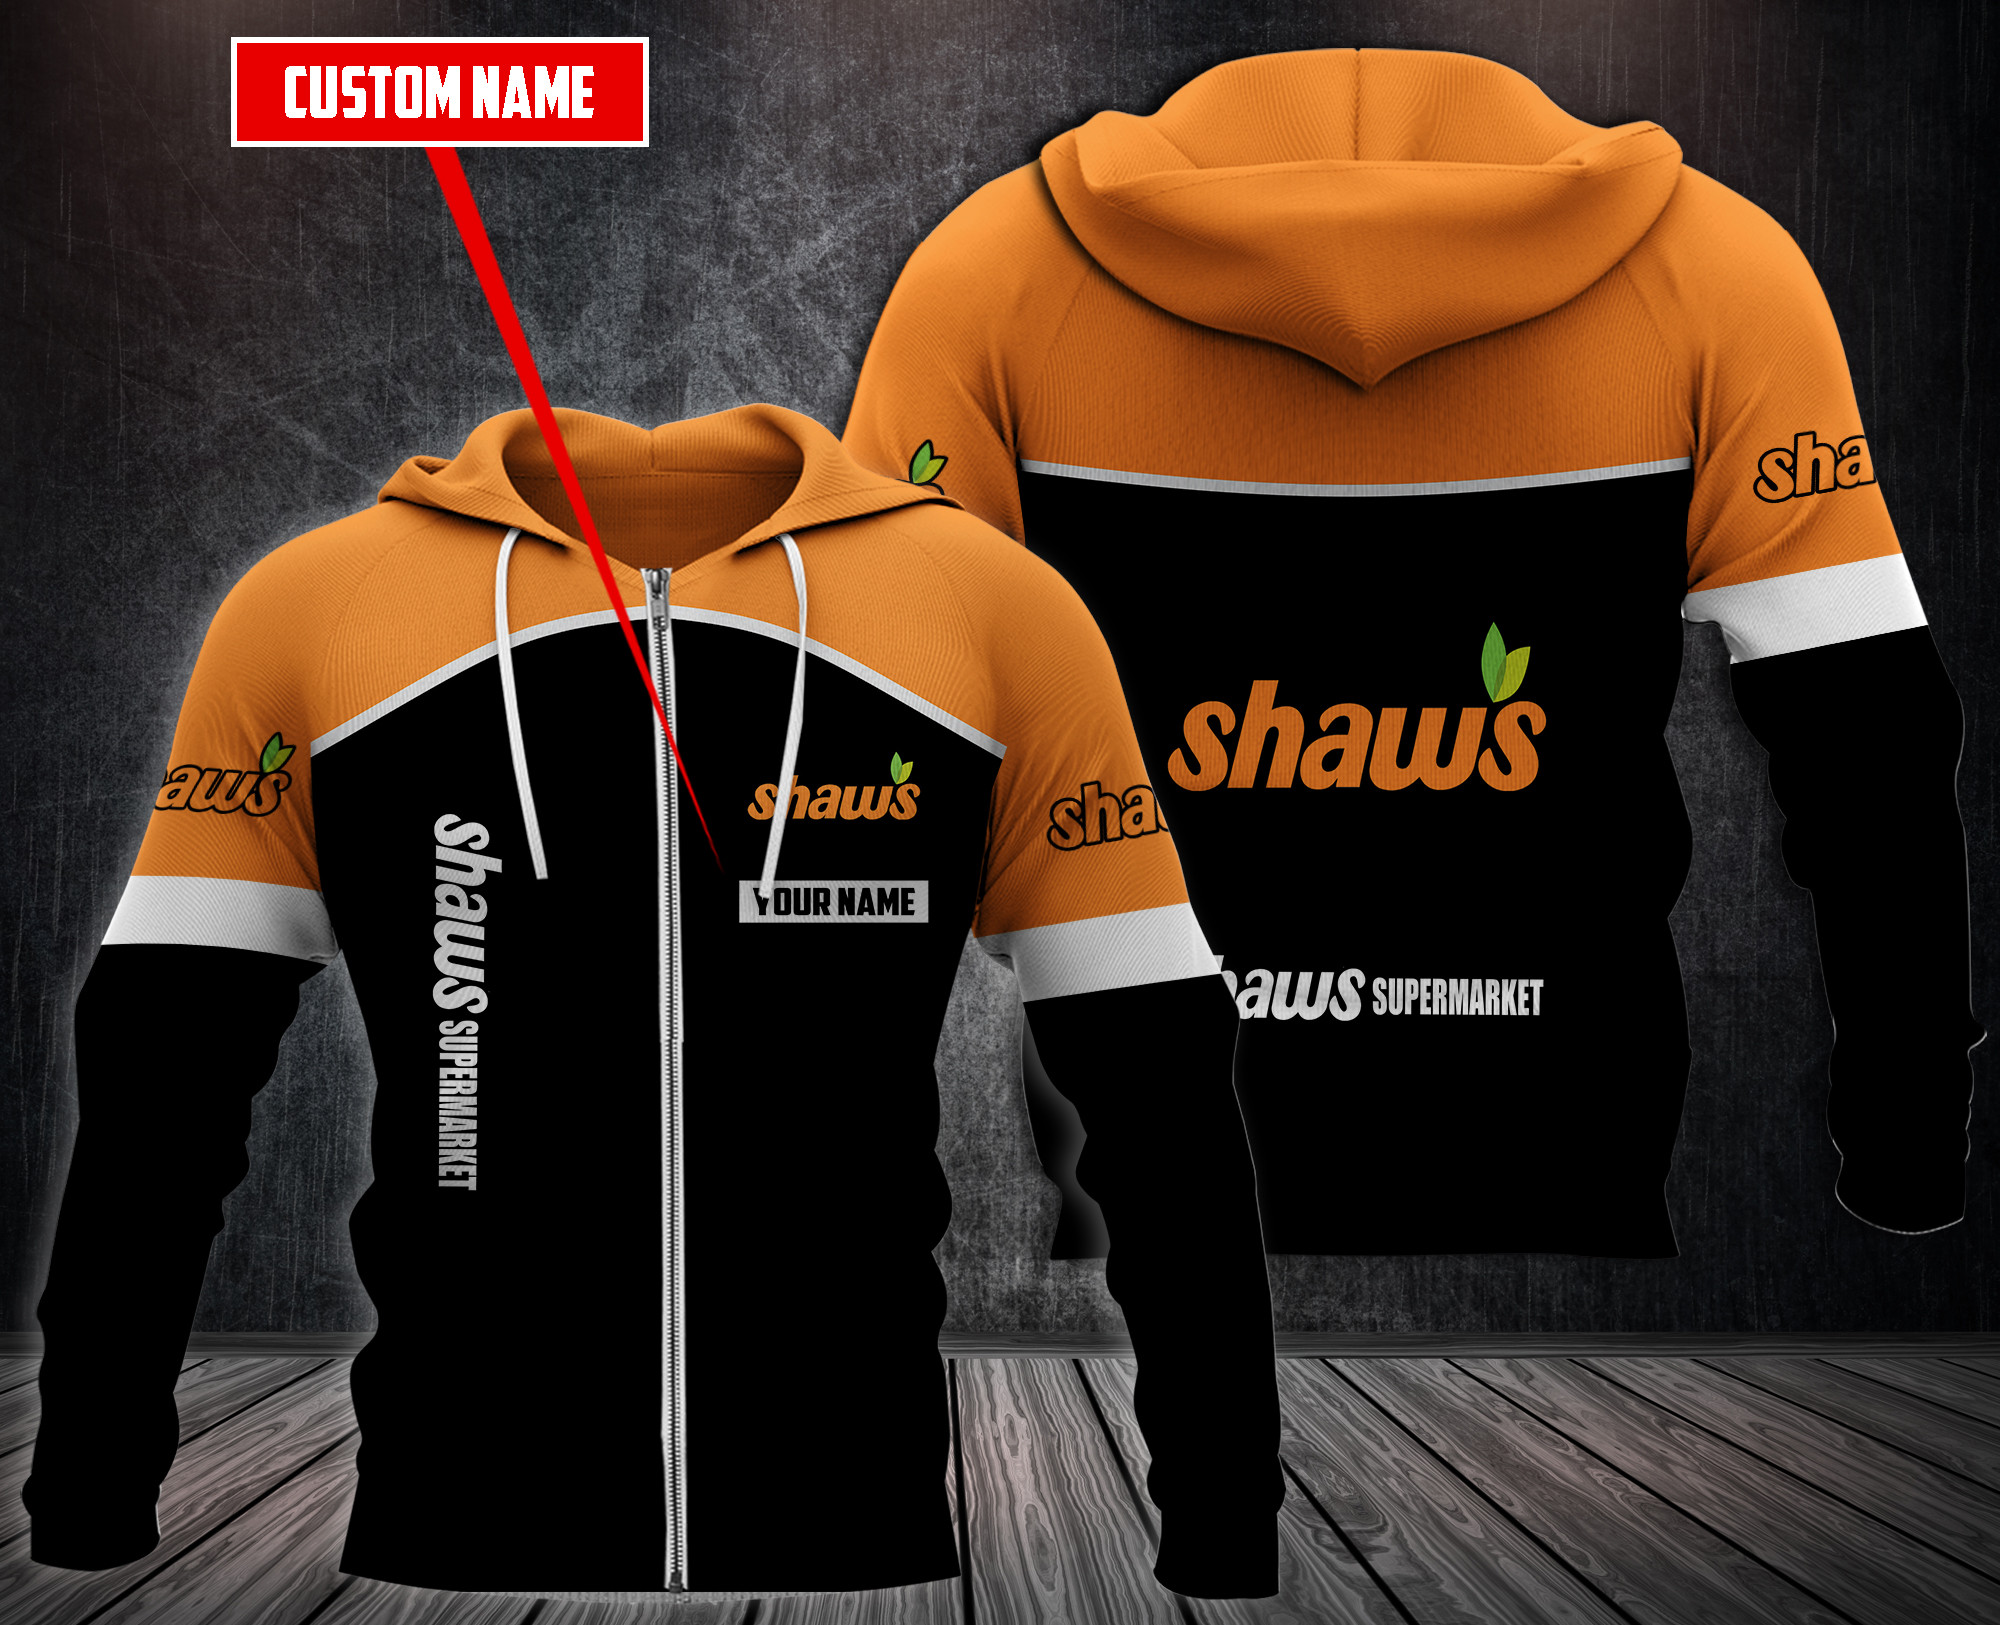 Choose the right hoodies for you on our boxboxshirt and ethershirt websites in 2022 24